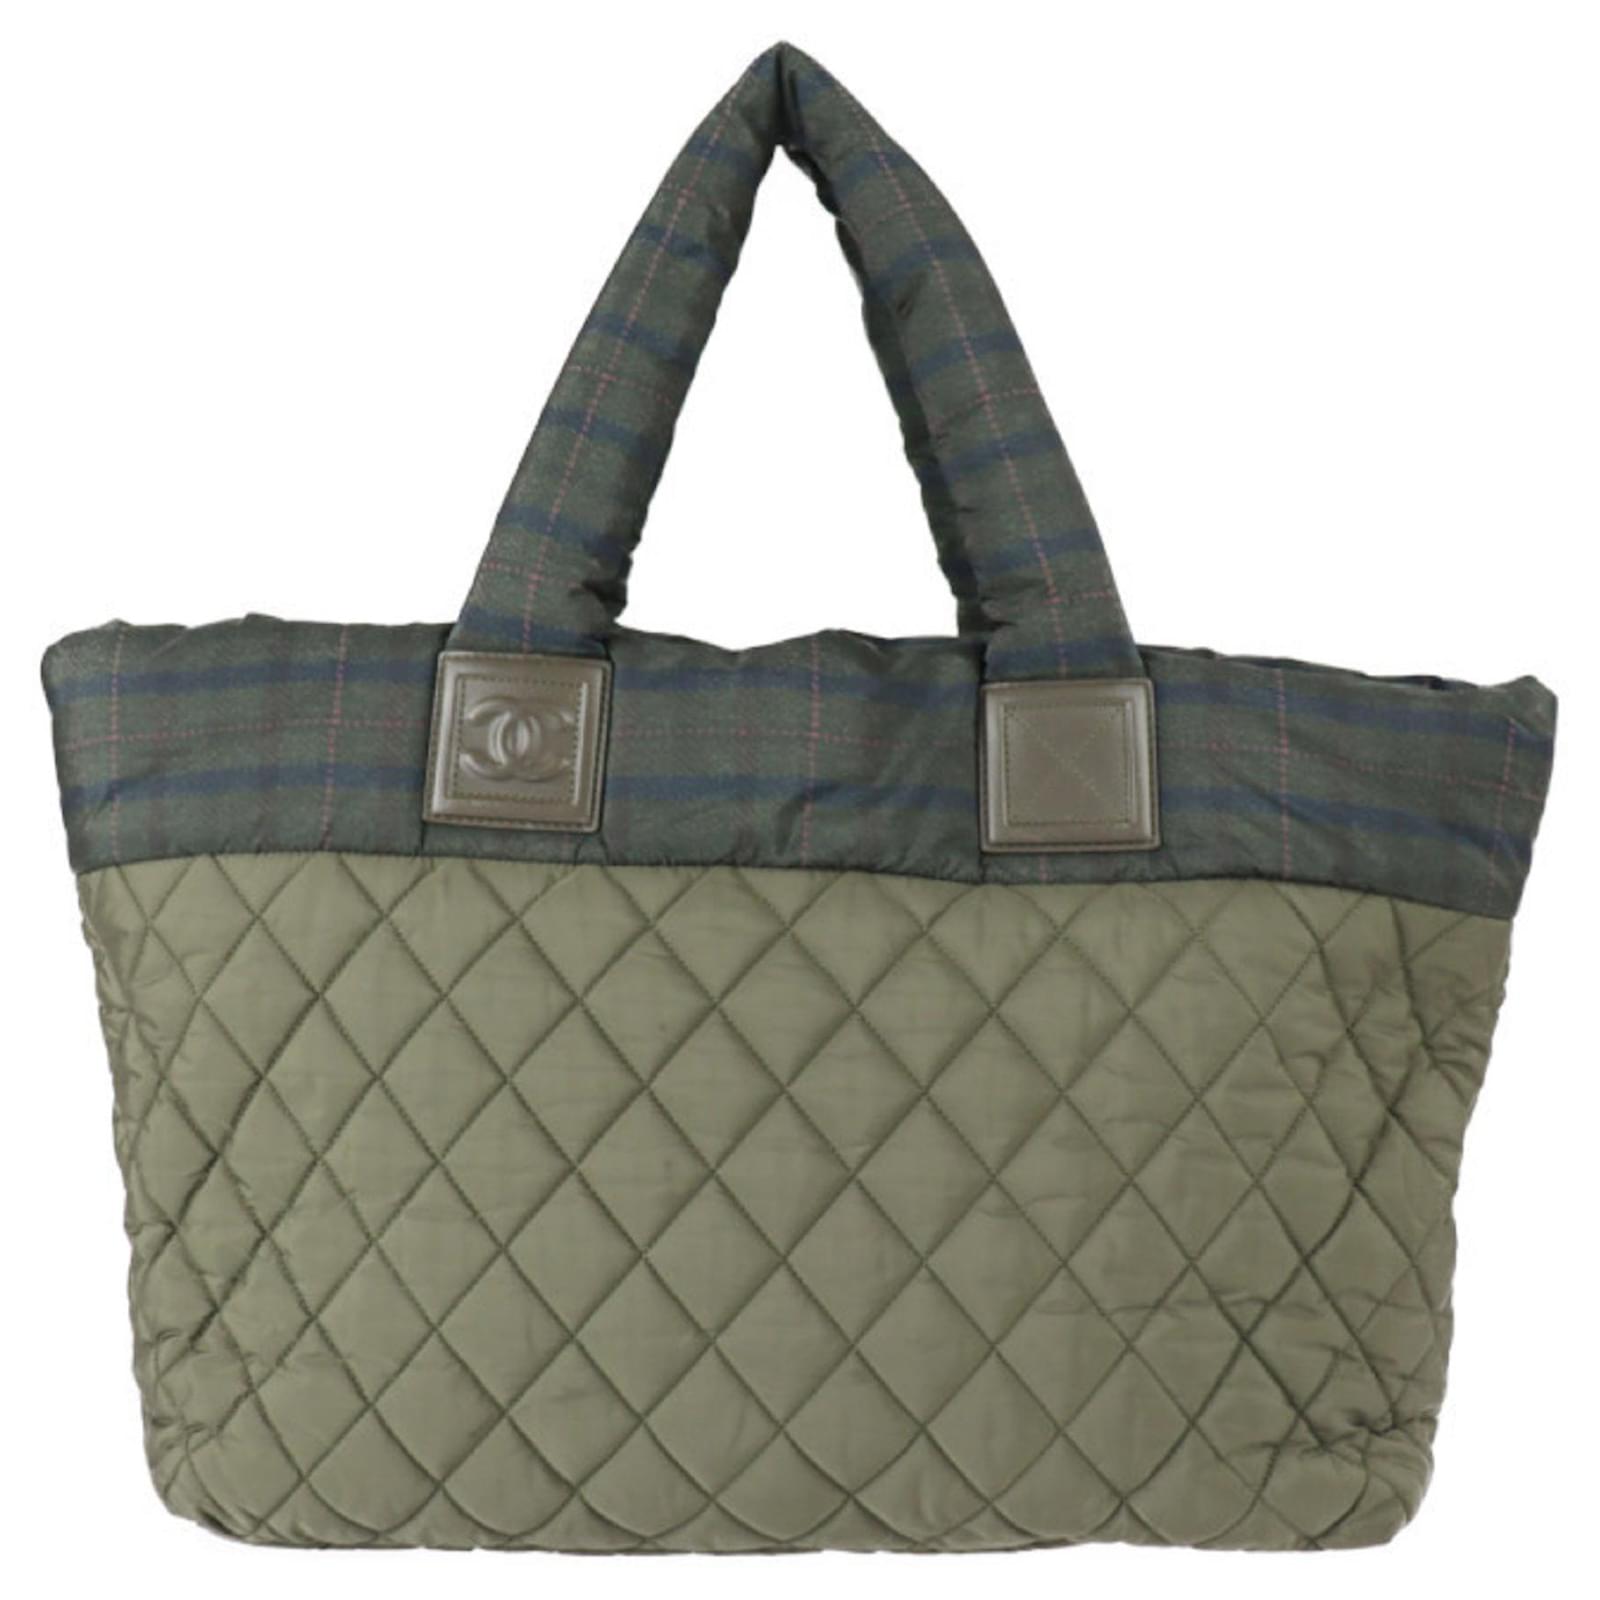 Chanel Coco Cocoon Tote Bag Olive